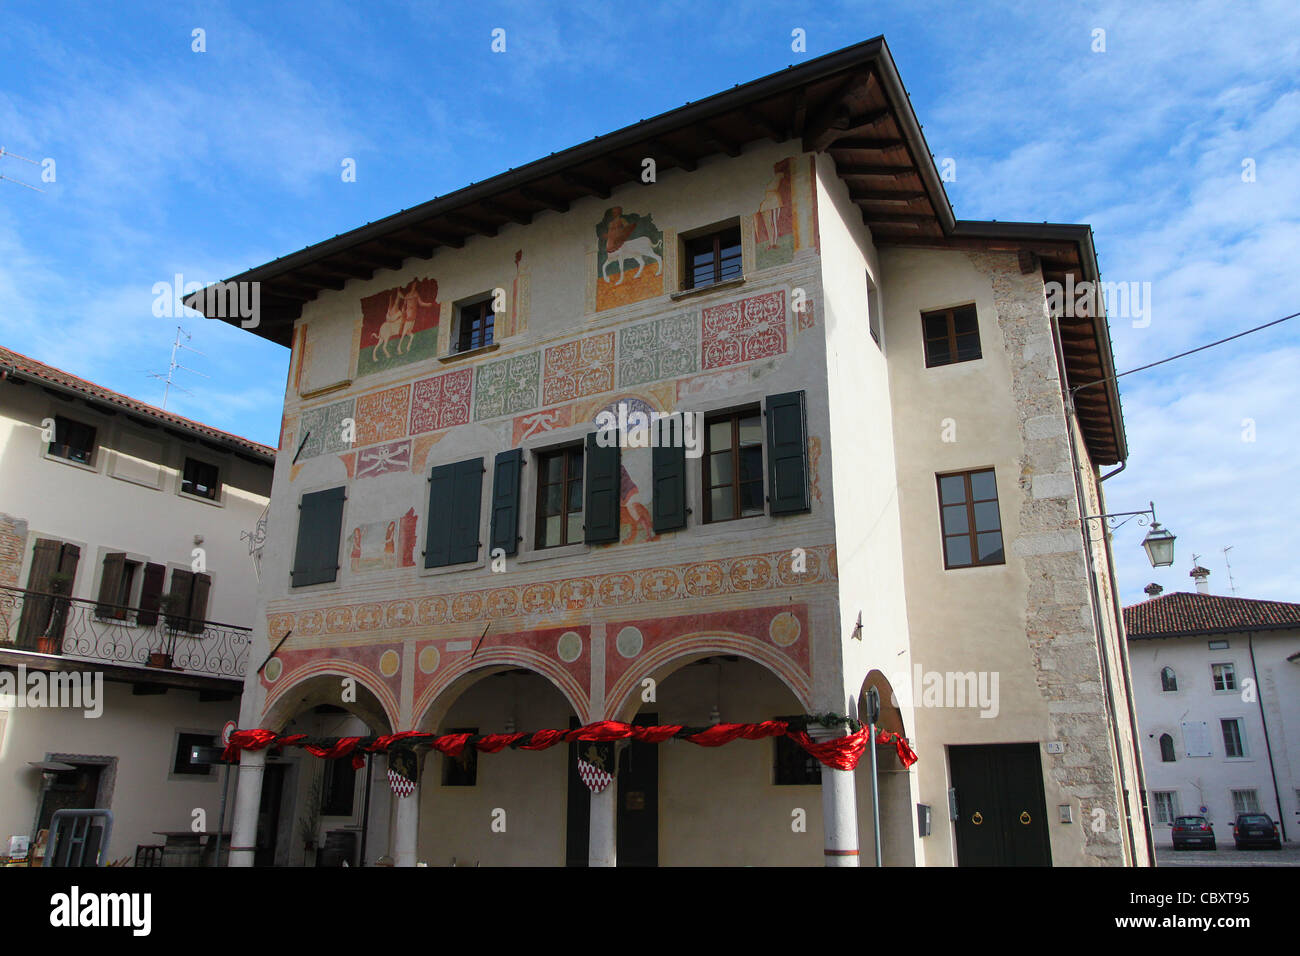 The 'Palazzo Ercole' in the historical center of Spilimbergo, Italy. Stock Photo